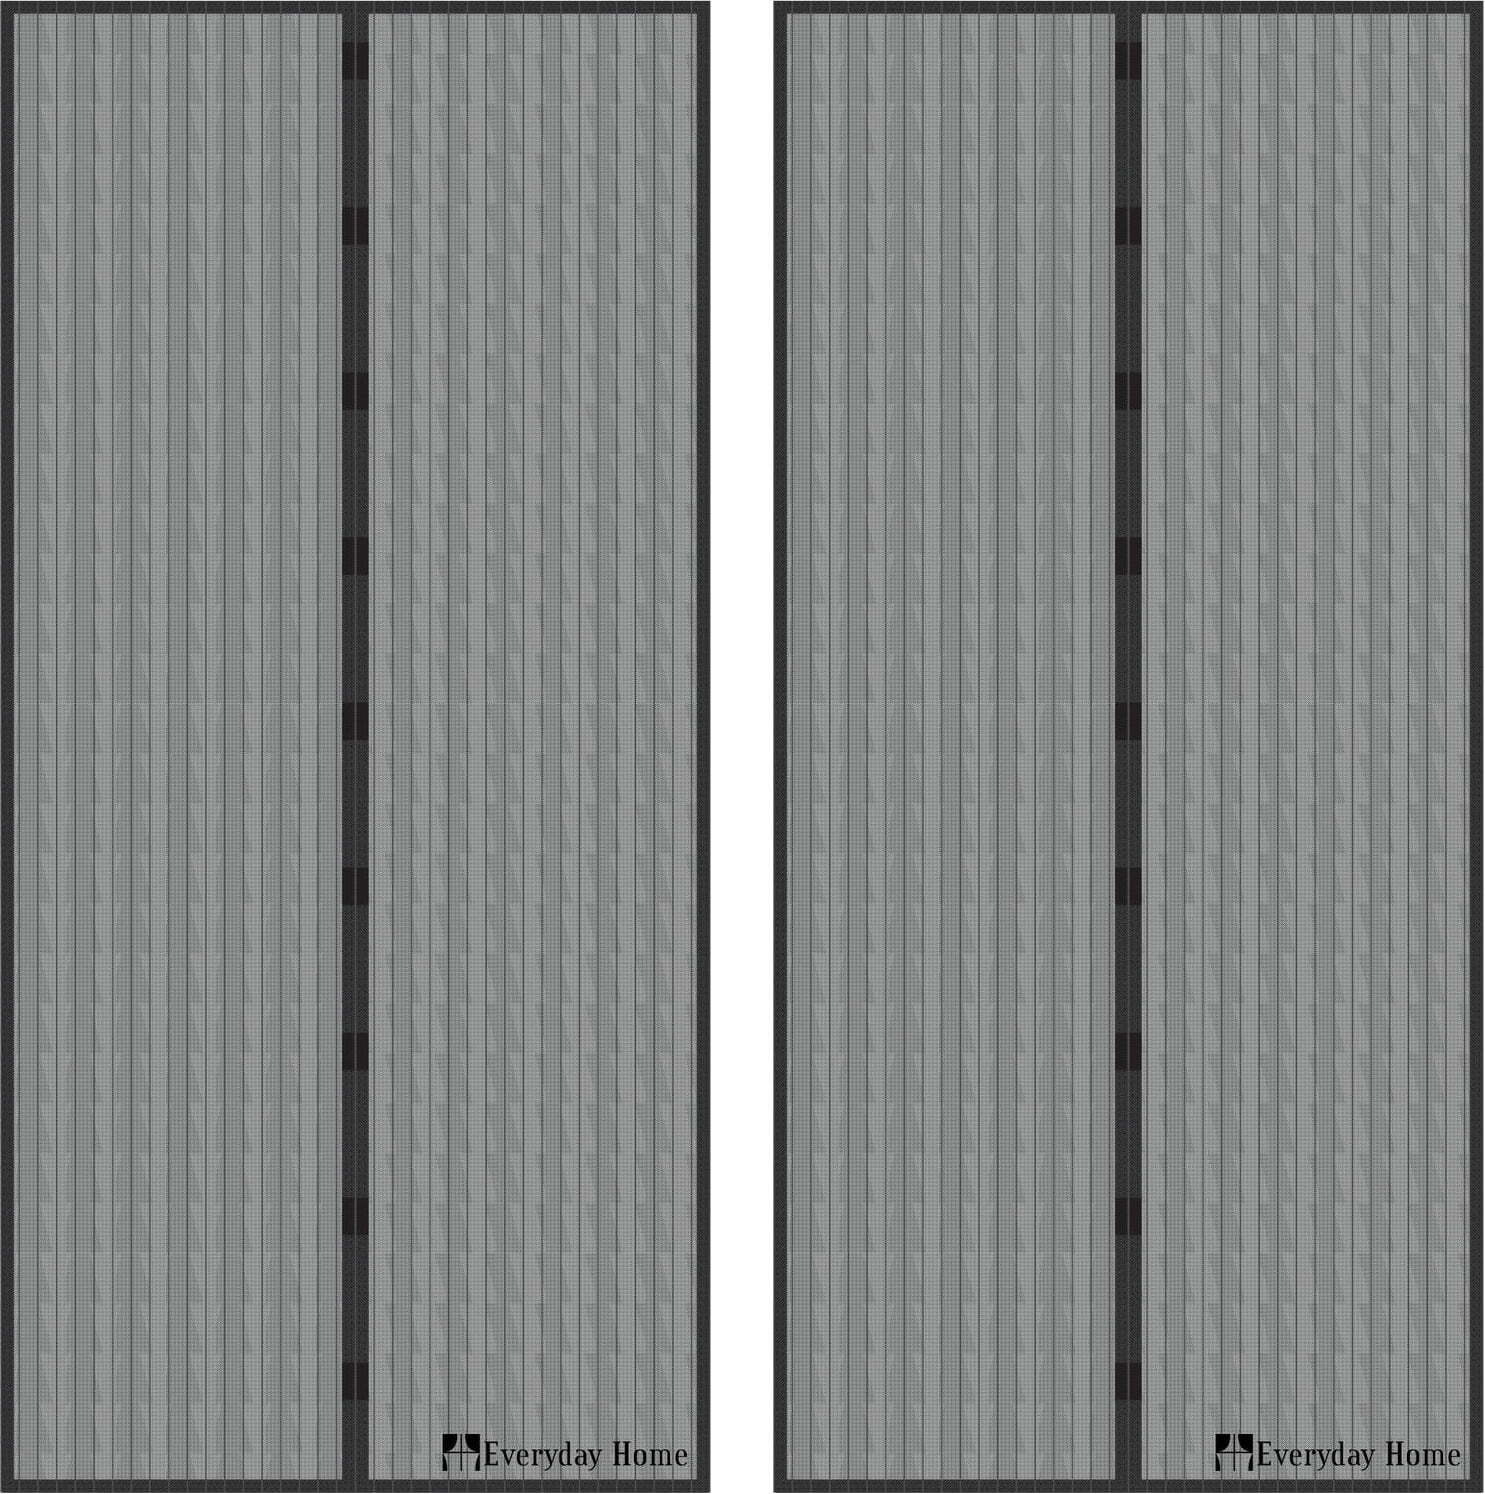  Auto Open and Close Magnetic Screen Door, 2 pack